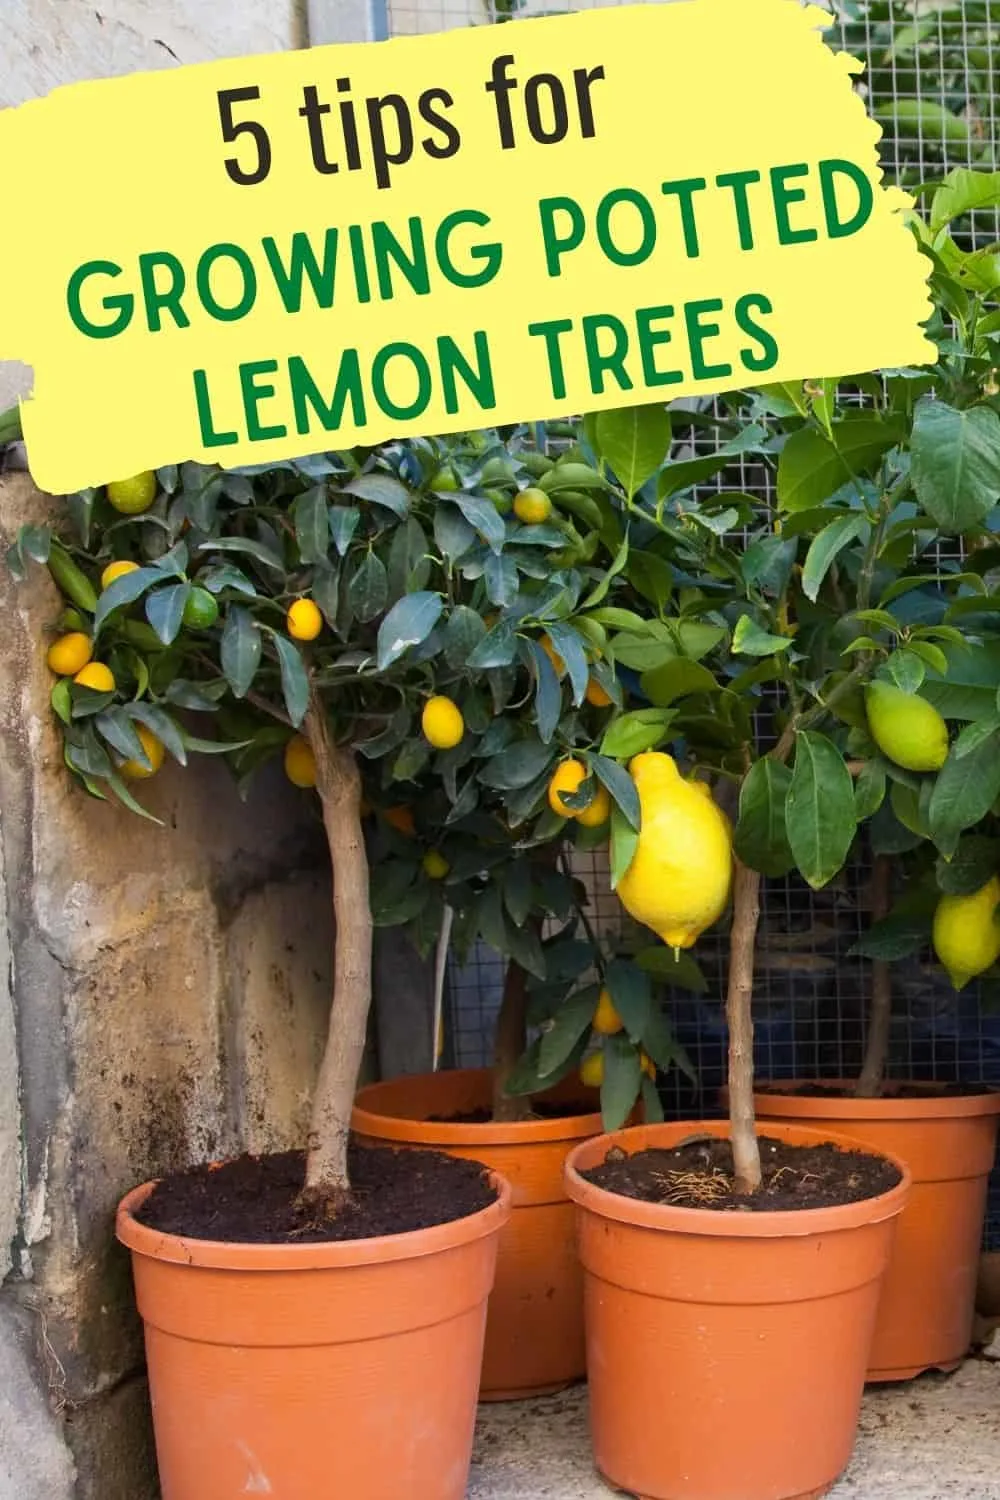 5 tips for growing potted lemon trees on Plant a Lemon Tree Day